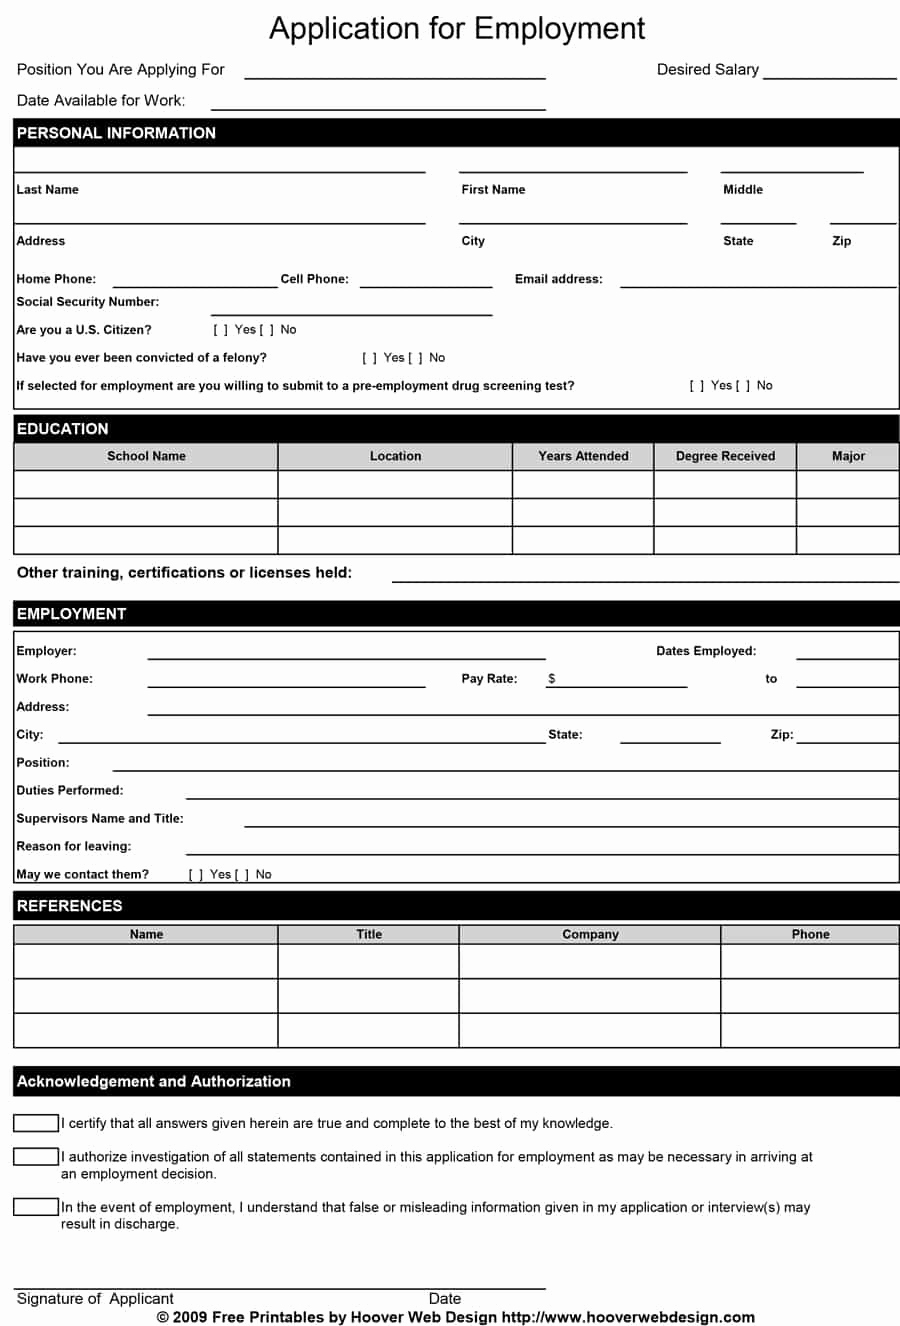 Job Application Template Doc Awesome 50 Free Employment Job Application form Templates